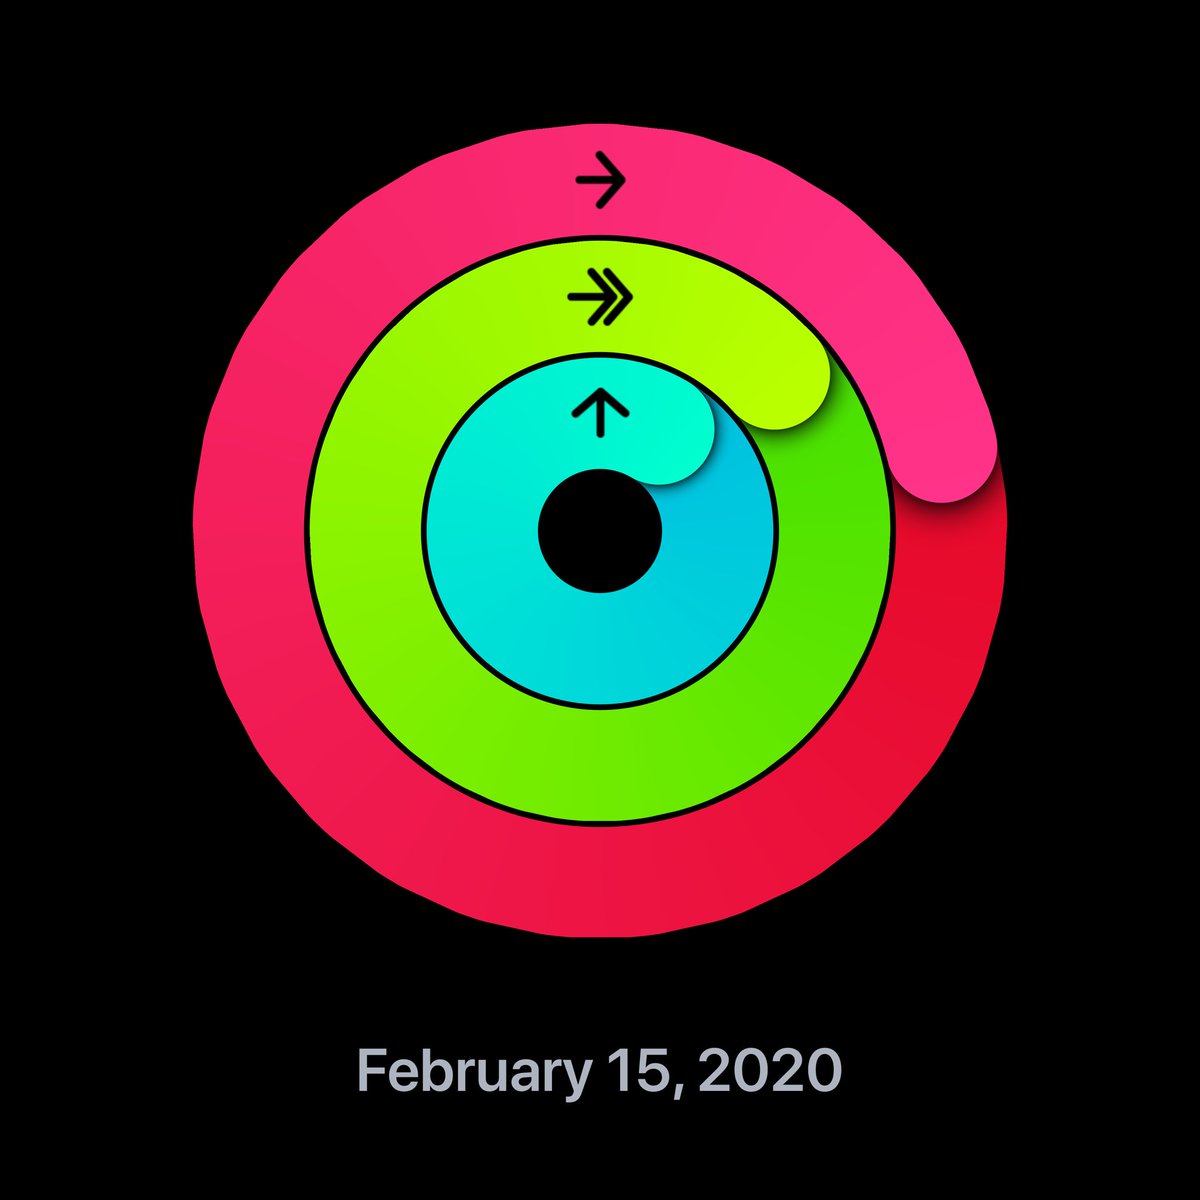 Check out my progress today with the Activity app on my #AppleWatch.